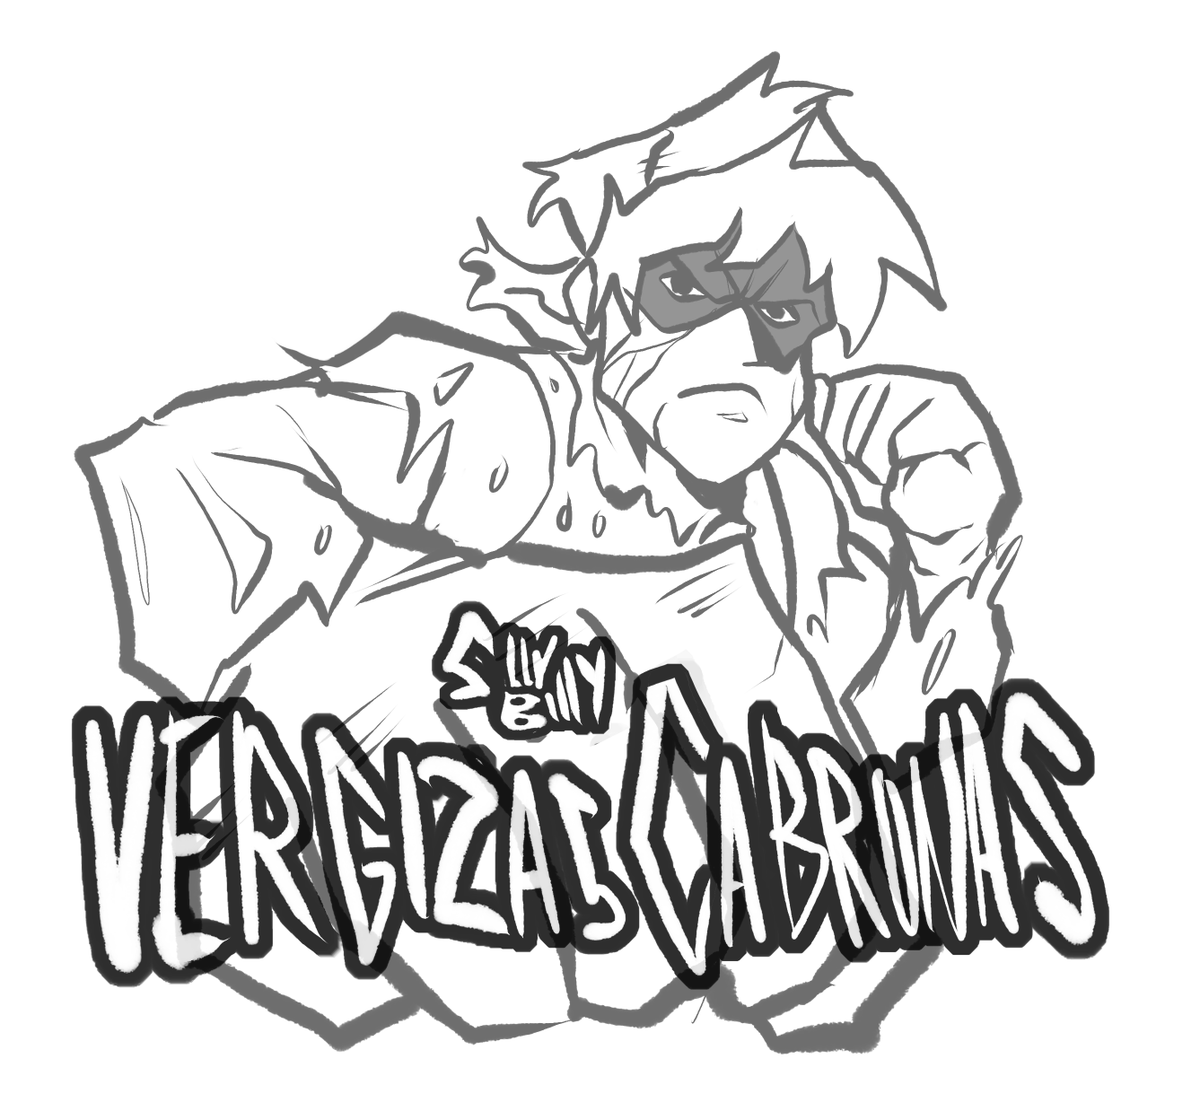 Btw here the full draw of Silly Billy Verguizas Cabronas